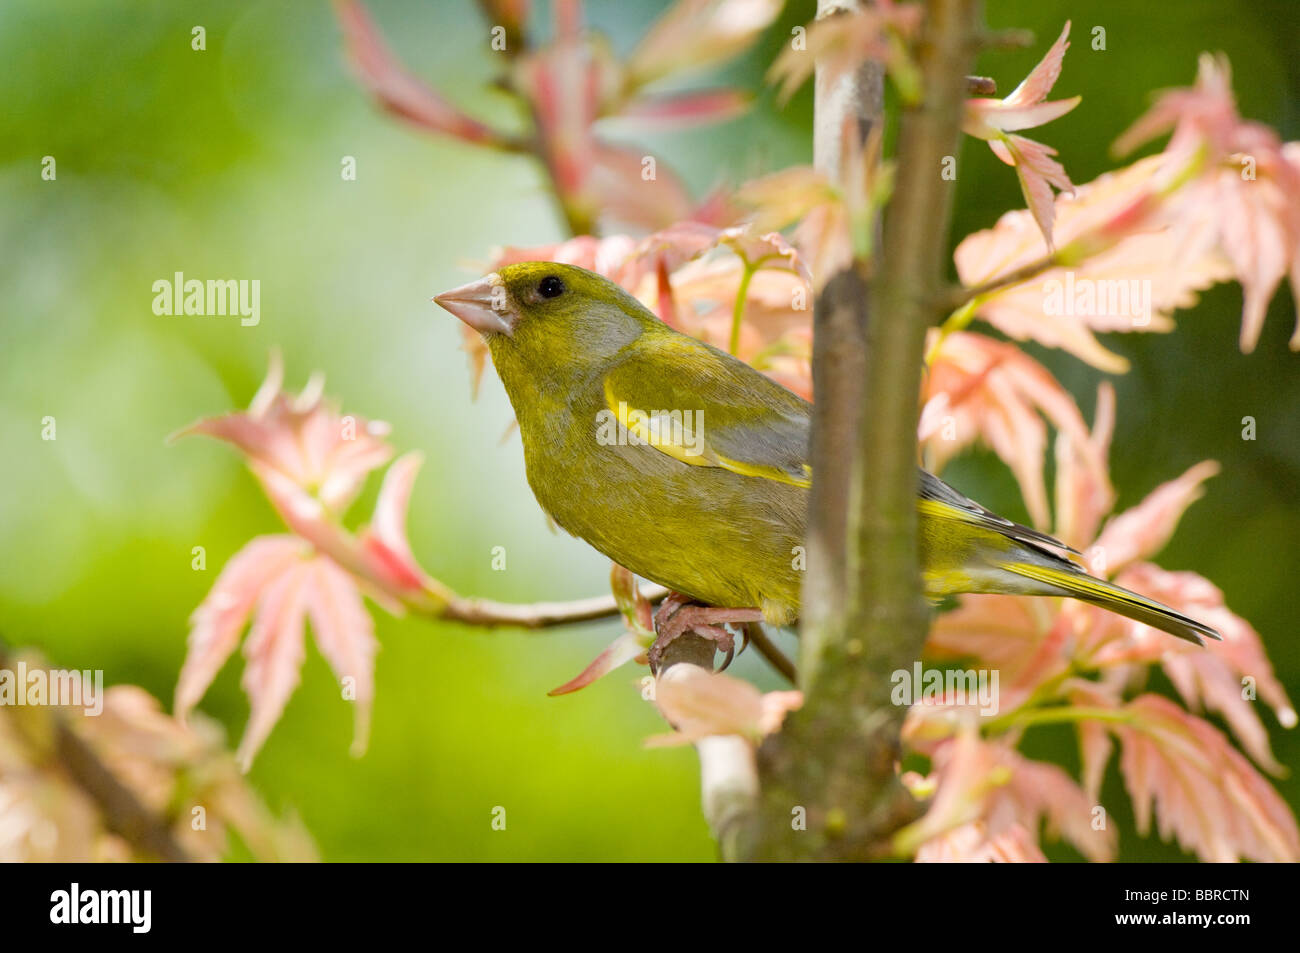 Greenfinch, Carduelis chloris, adult male perched in a Japanese Maple tree in a garden in spring. Stock Photo